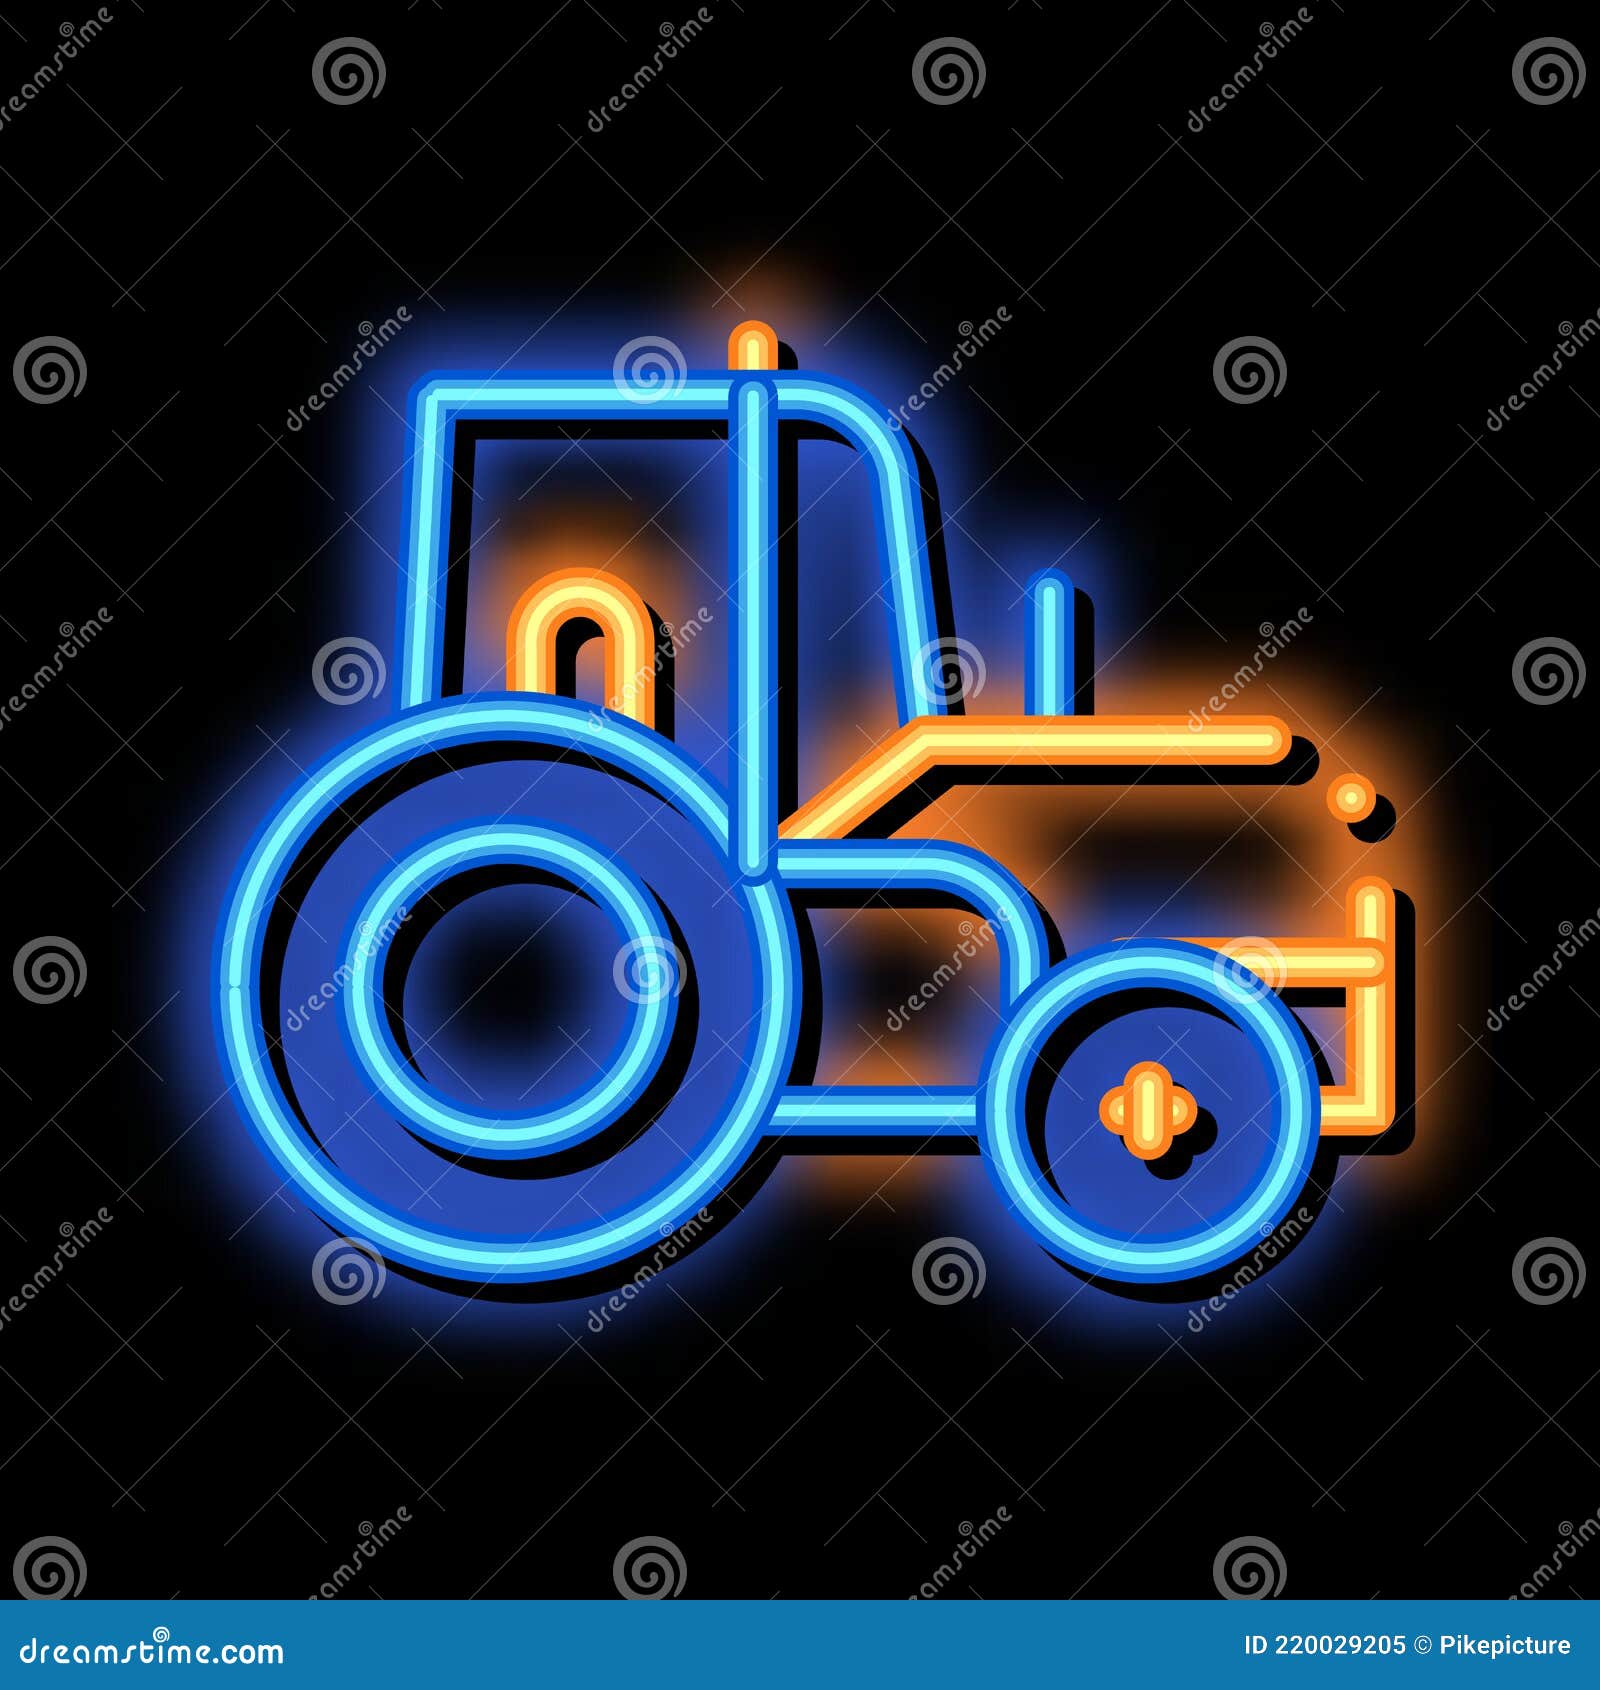 Farmland Tractor Vehicle Neon Glow Icon Illustration Stock Vector -  Illustration of agricultural, industrial: 220029205